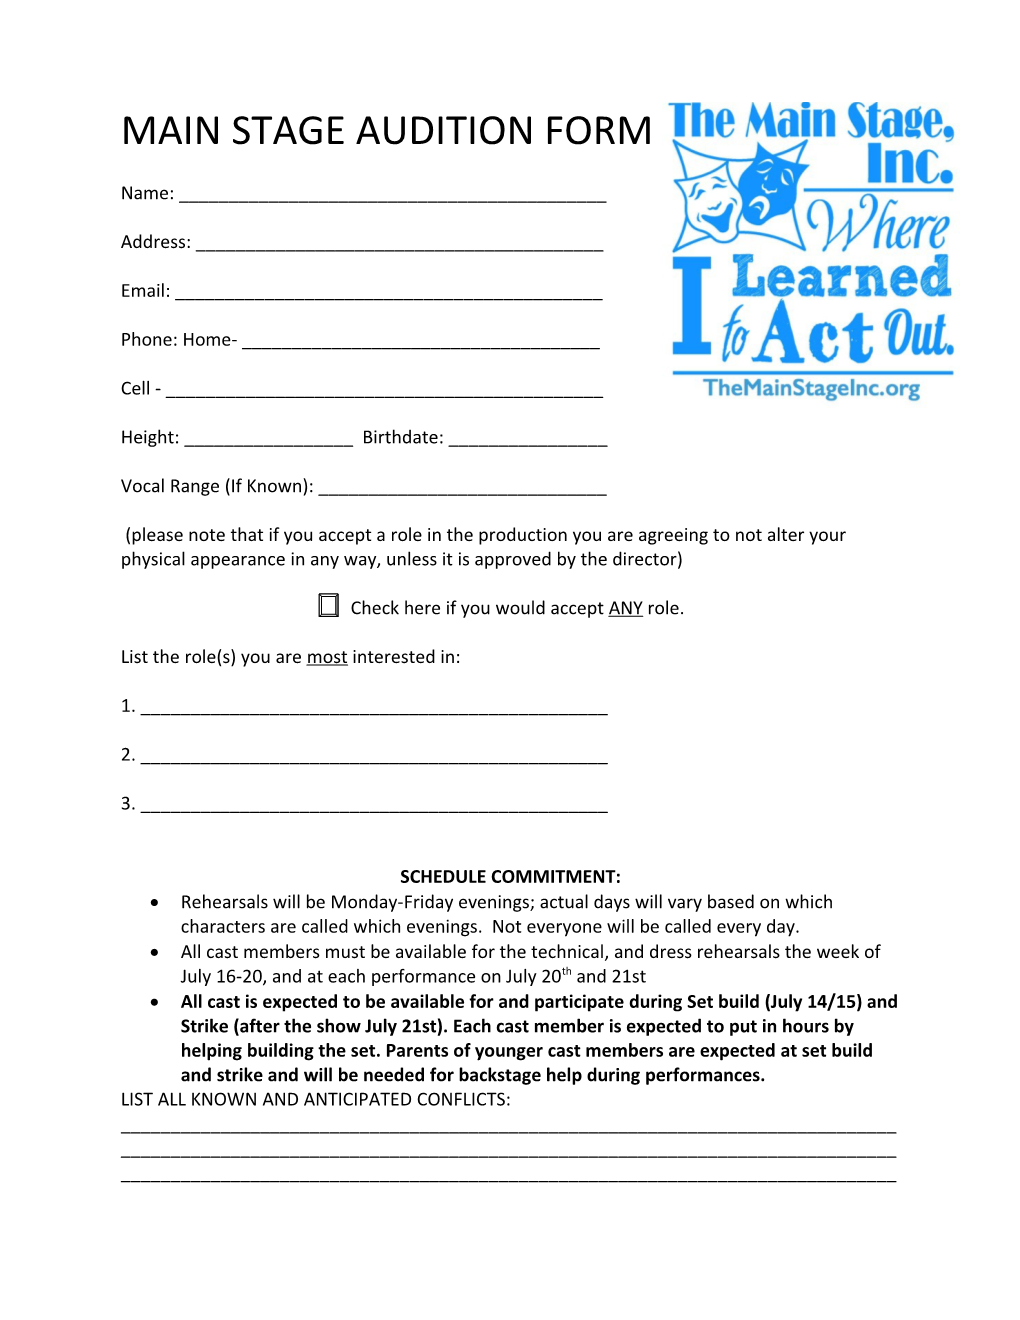 Main Stage Audition Form